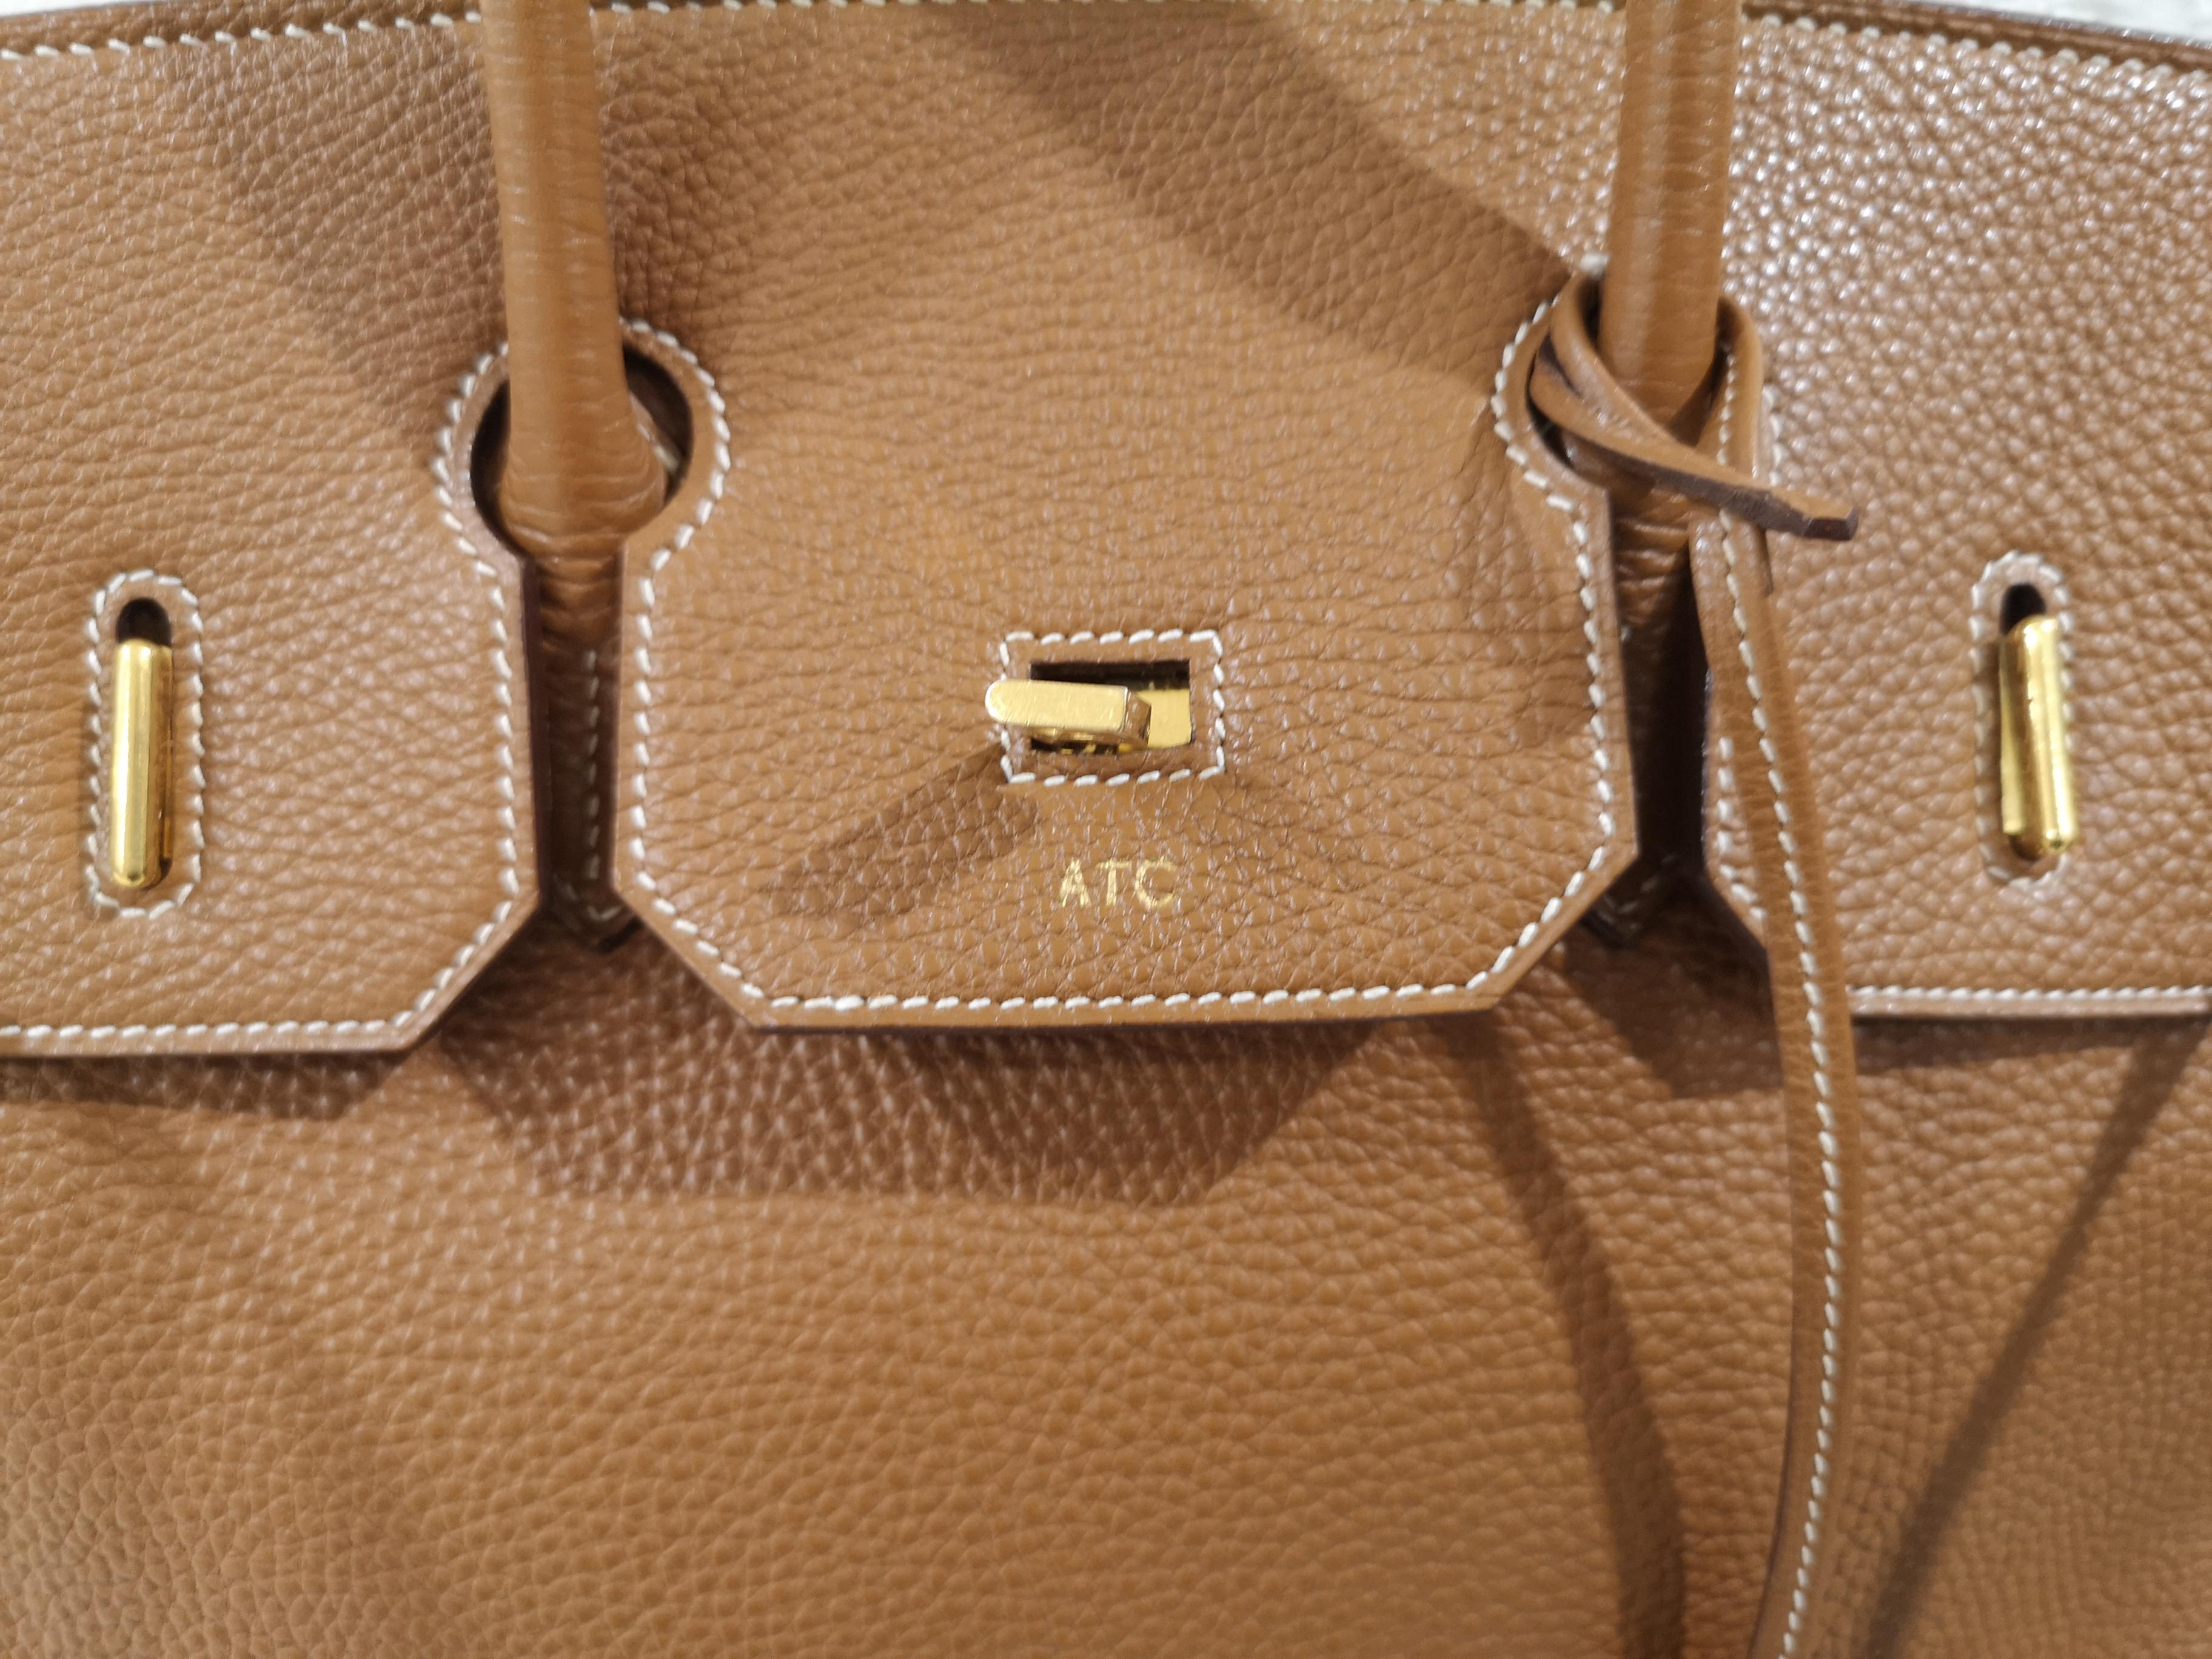 Hermès Courchevel HAC Birkin 32 Gold customized ATC capital letter on the front  This luxury classic is crafted of grained Courchevel calfskin leather in golden camel brown. The bag features rolled top handles, a strap closure, and a gold plated